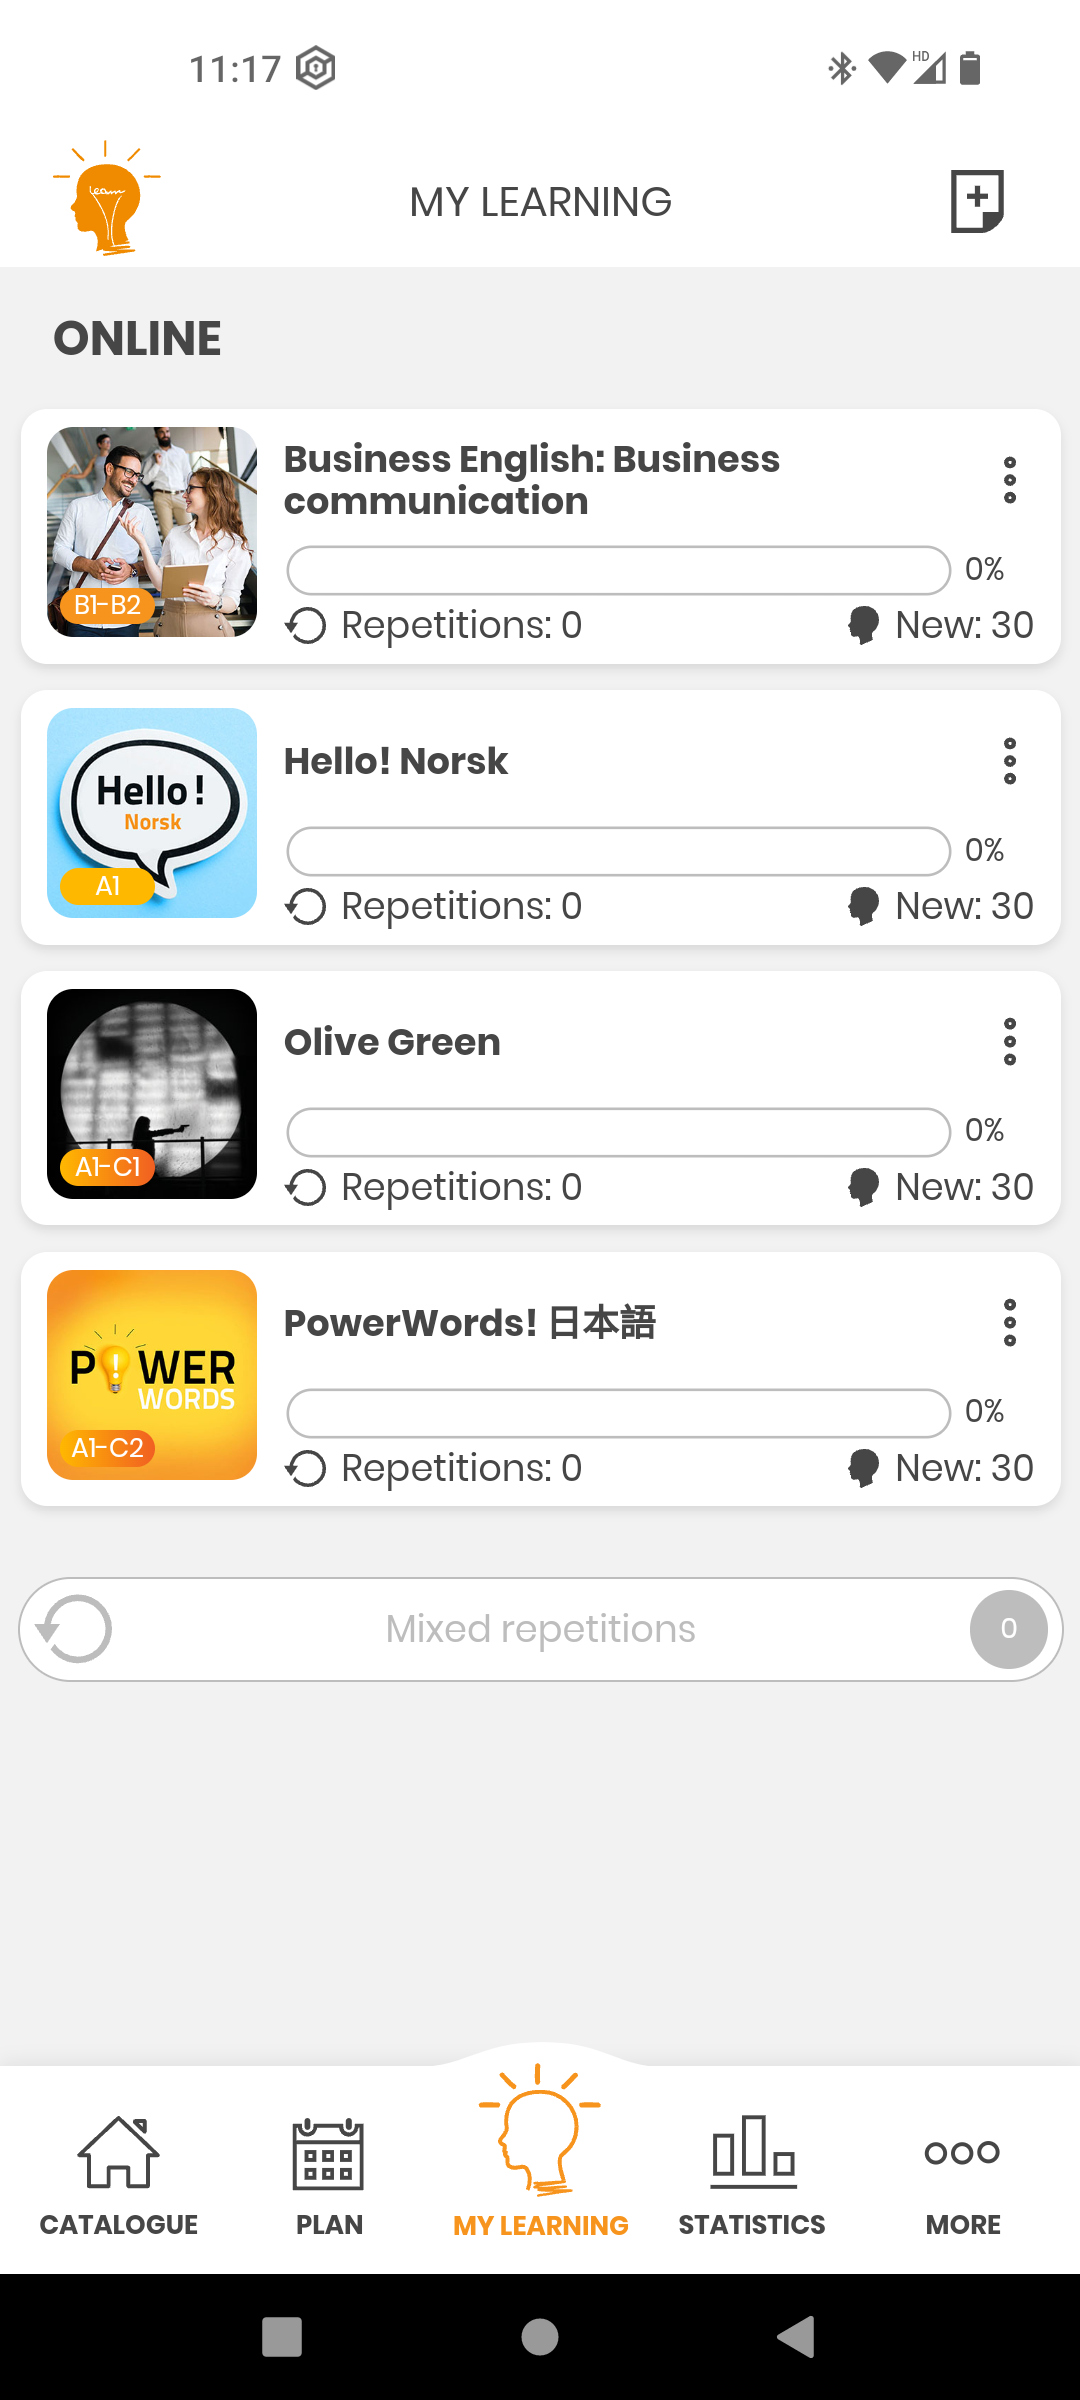 SuperMemo app - My learning